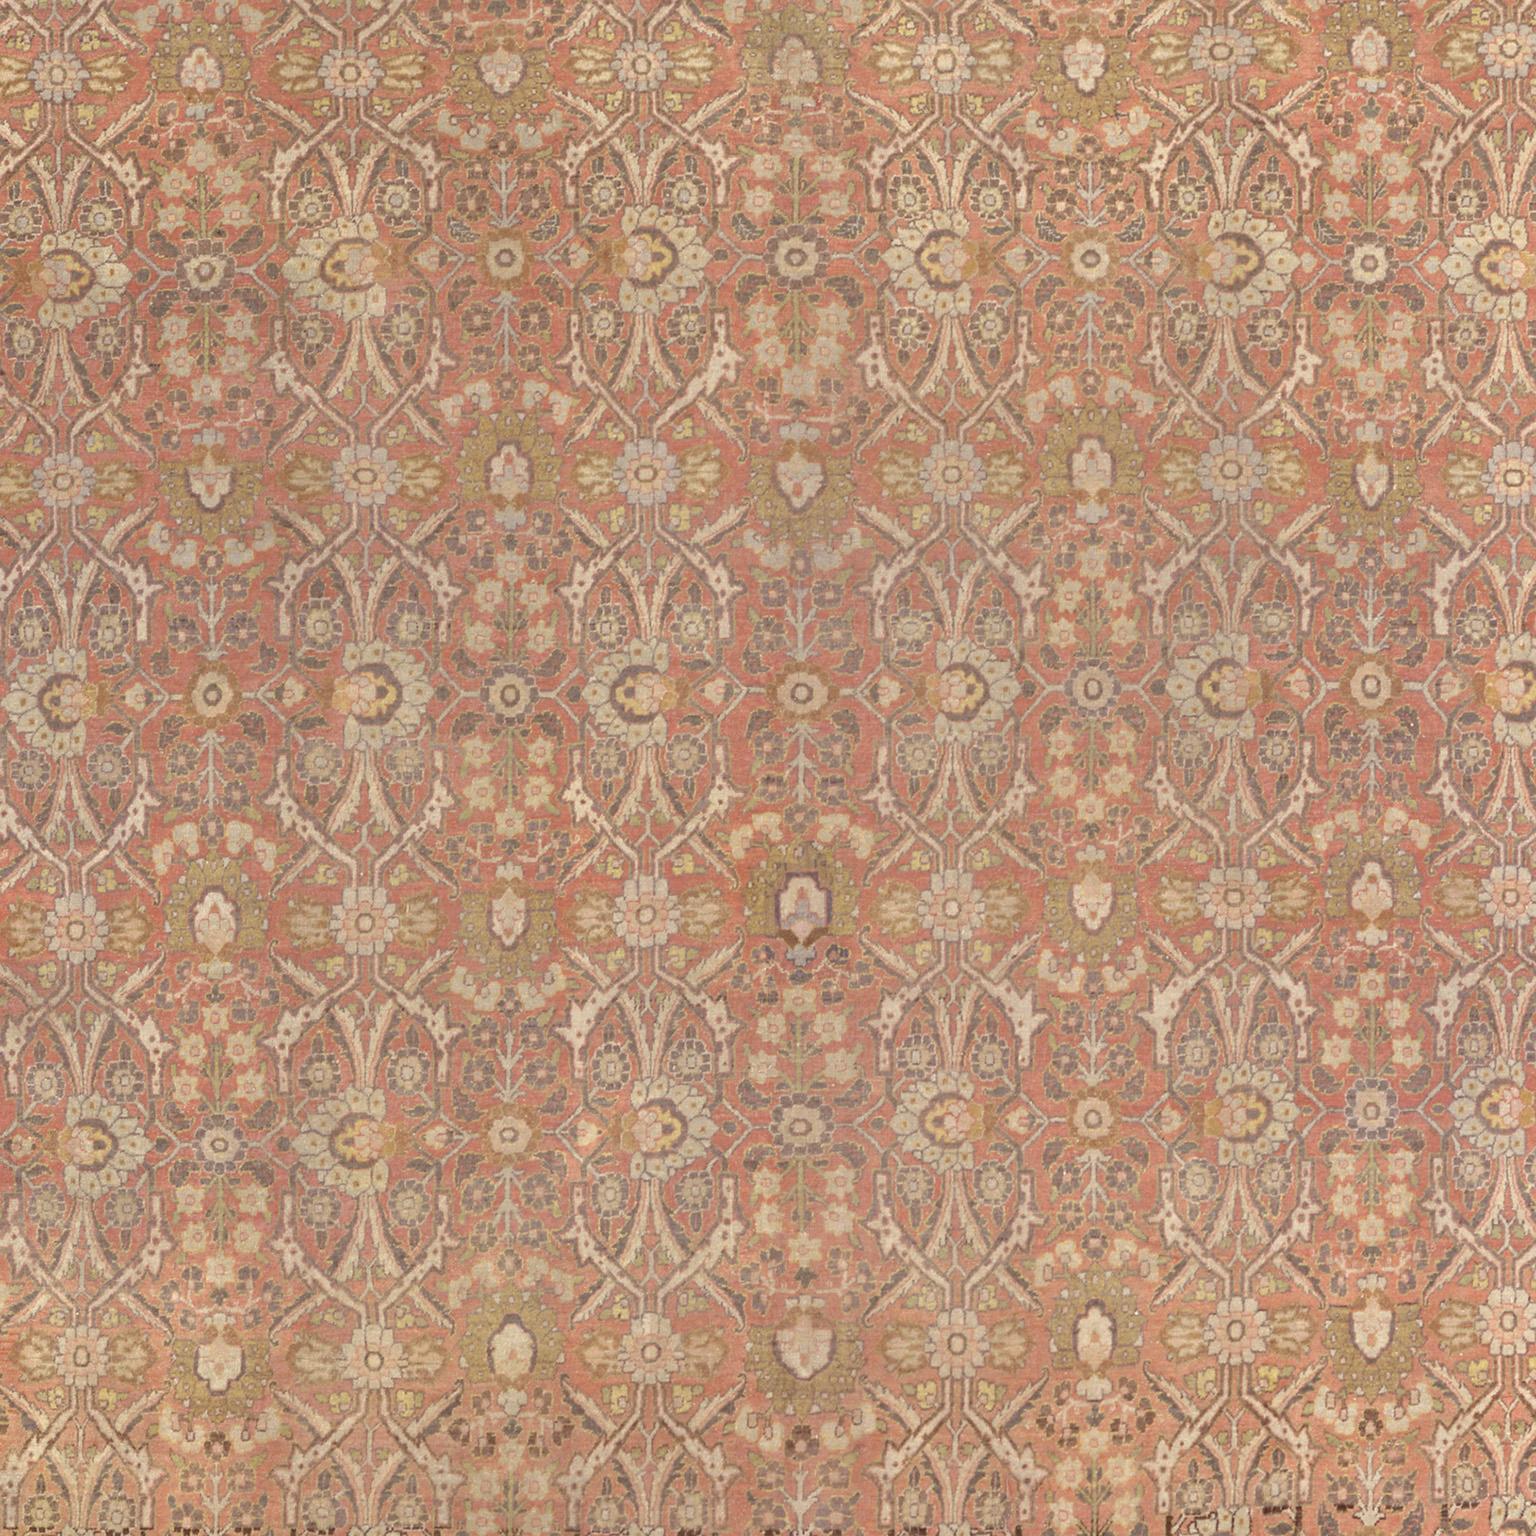 Hand-Knotted Early 20th Century Persian Tabriz Rug